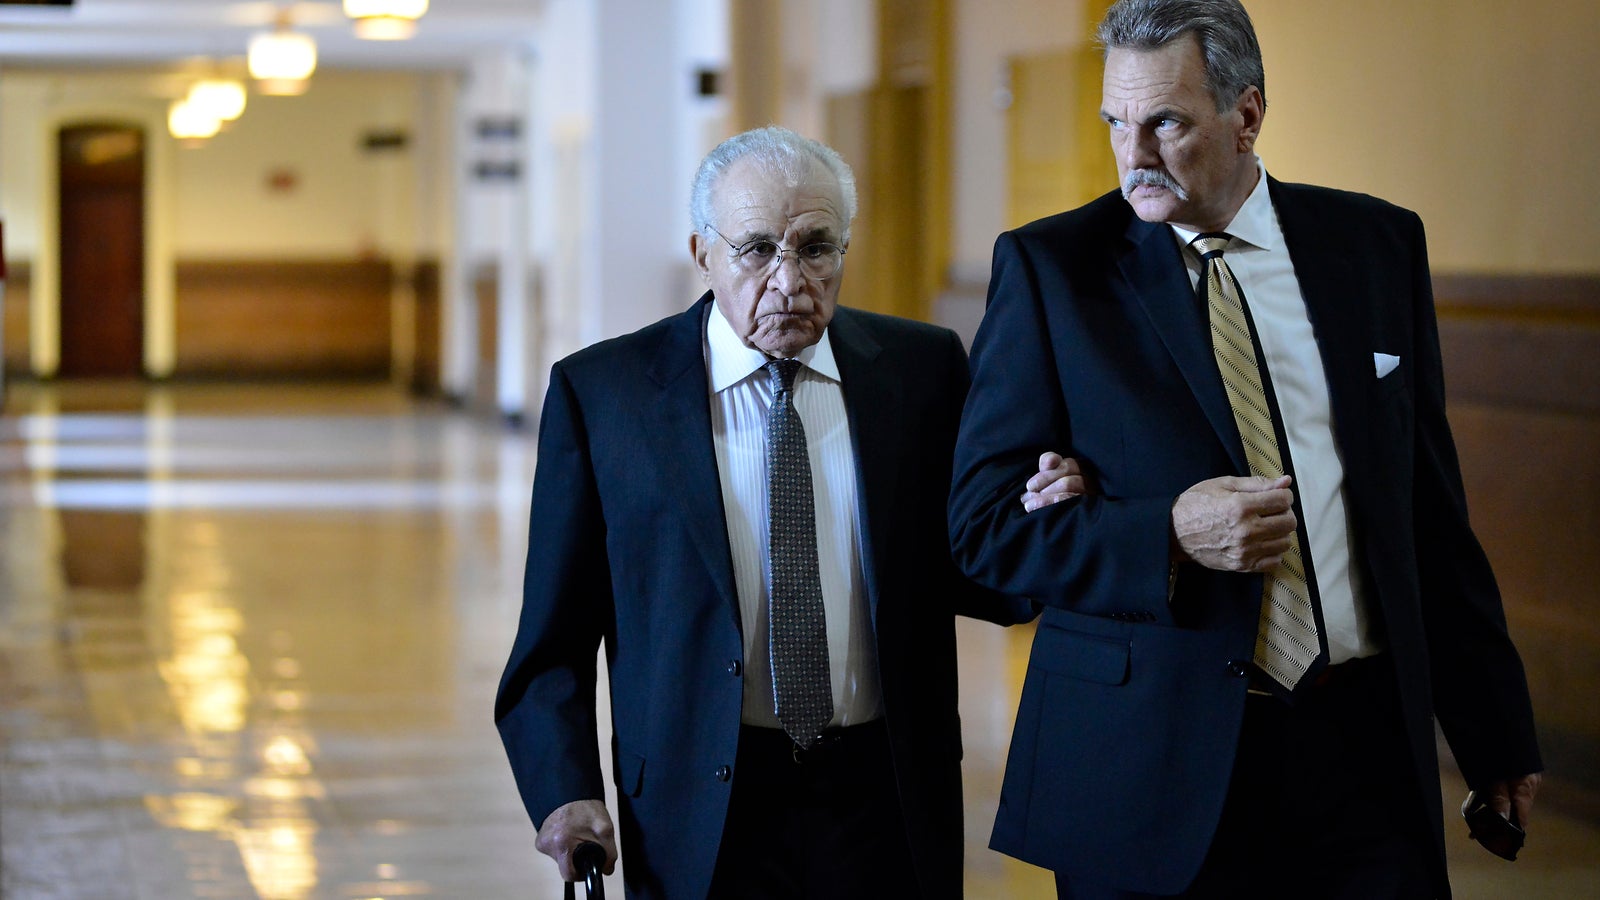 Richard Basciano (left)arrives at City Hall to testify in the civil trial that charges he has responsibility for the building collapse that killed six people in a Salvation Army thrift store in 2013. (Bastiaan Slabbers for NewsWorks)